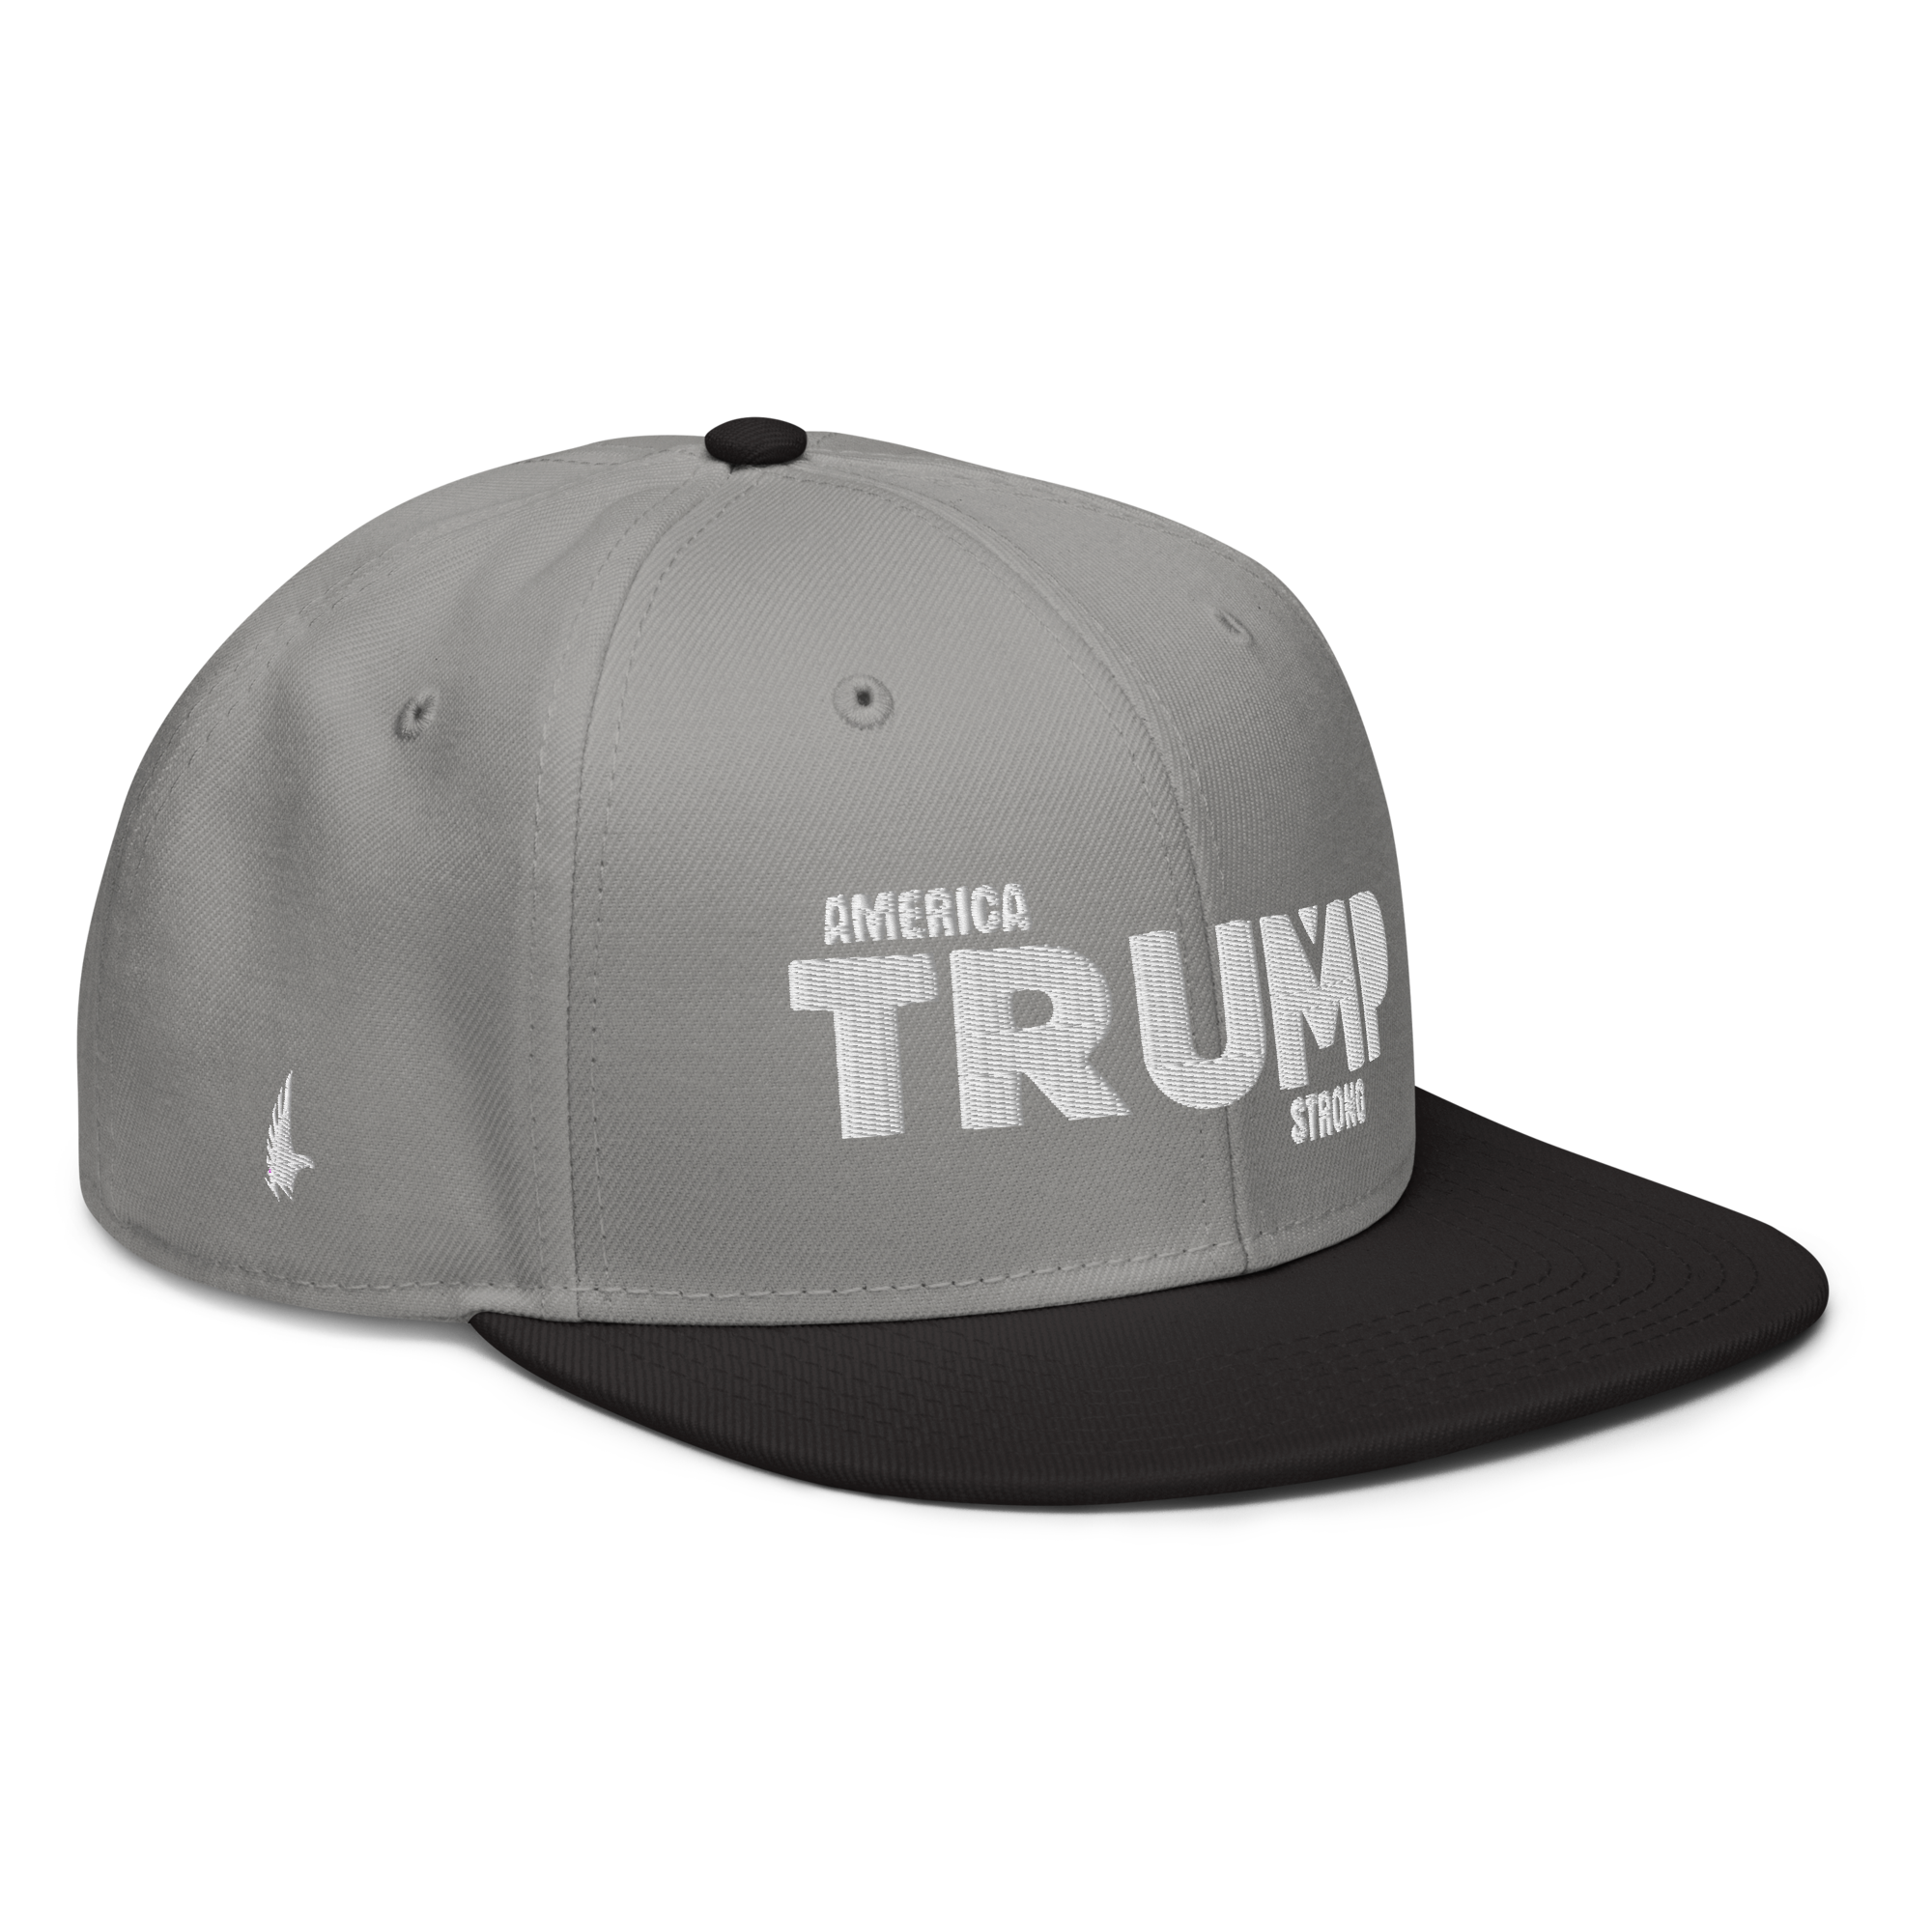 Loyalty Vibes America Trump Strong Snapback Hat Grey White Black One size - Loyalty Vibes